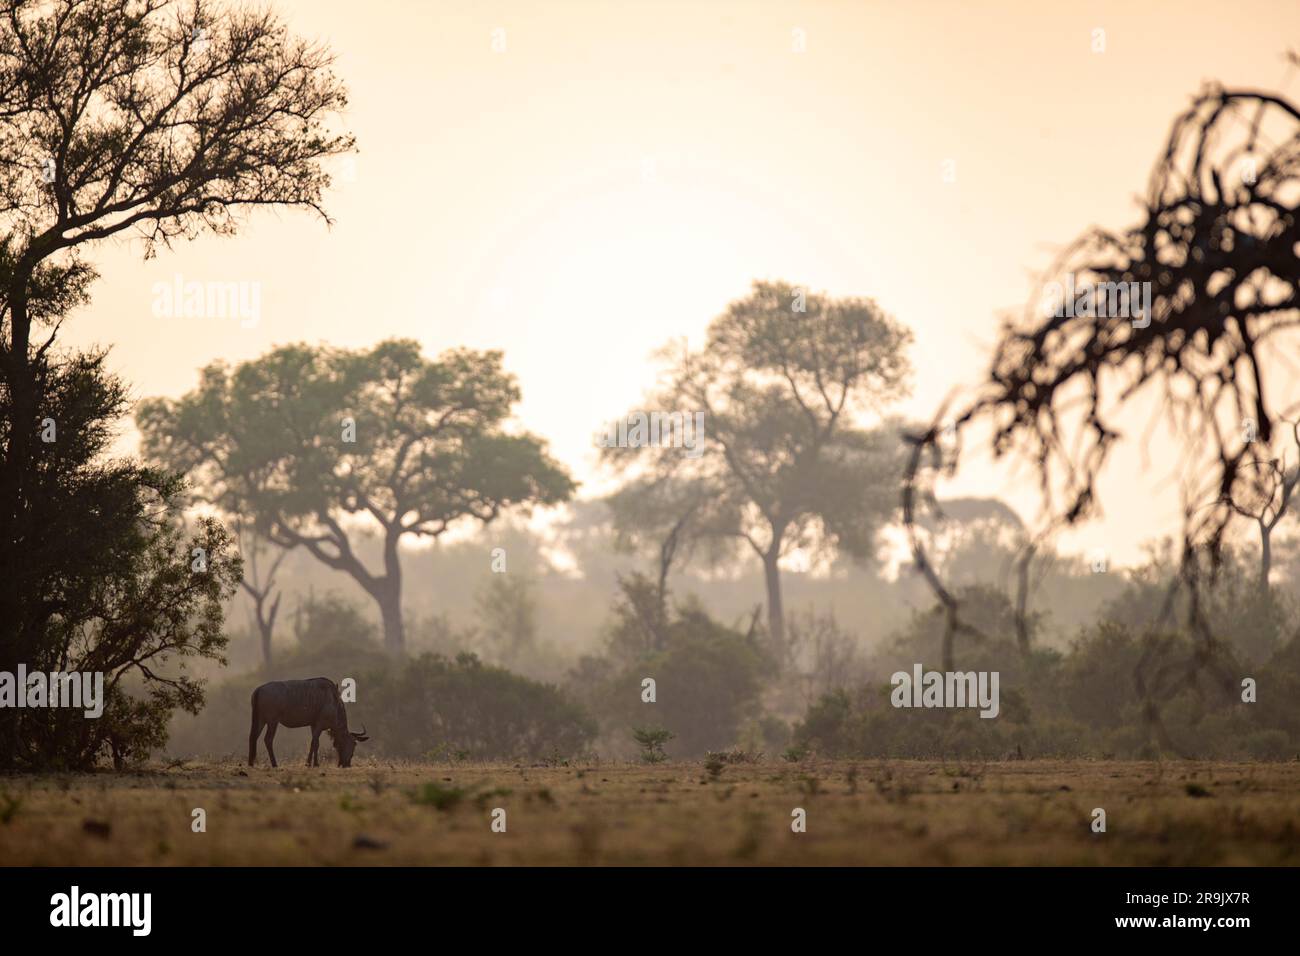 A wildebeest, Connochaetes, grazes on grass in a misty morning. Stock Photo